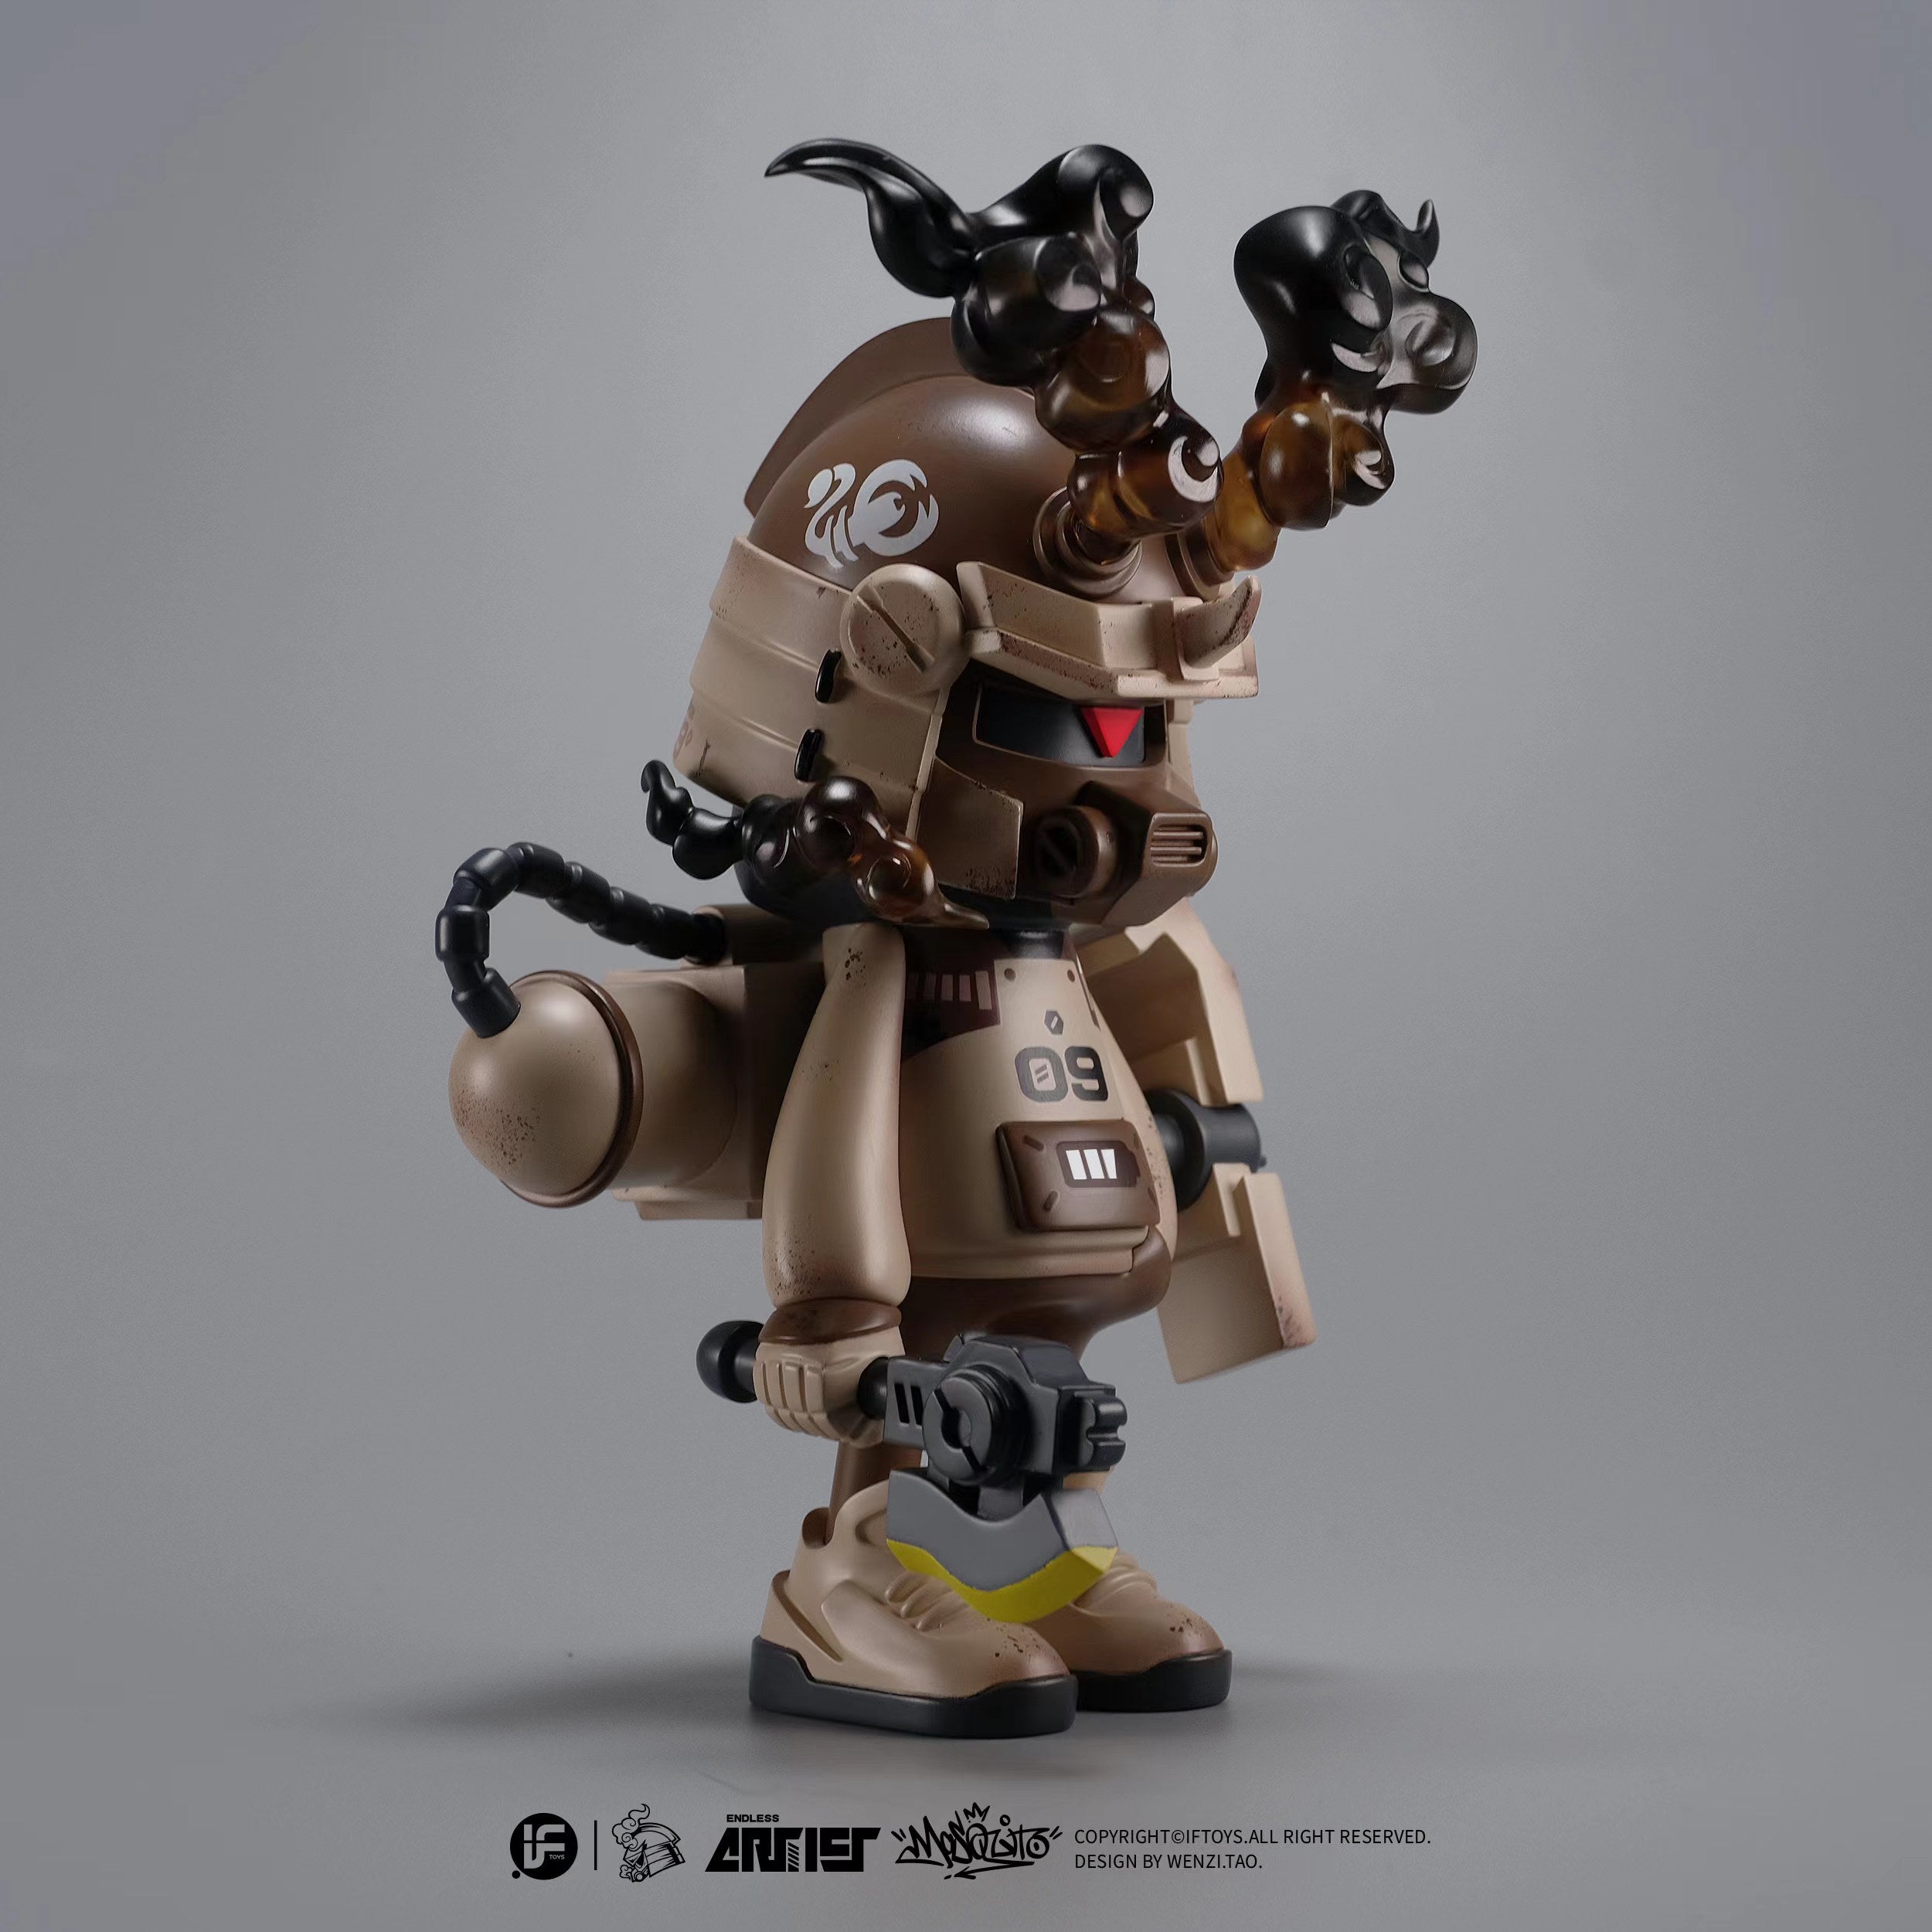 A blind box and art toy store presents ENDLESS SERIES -- Scorpion Force 09 By Wenzi.Tao: a 6.1 mecha LEGO robot action figure. Limited to 198, crafted from PU Resin.